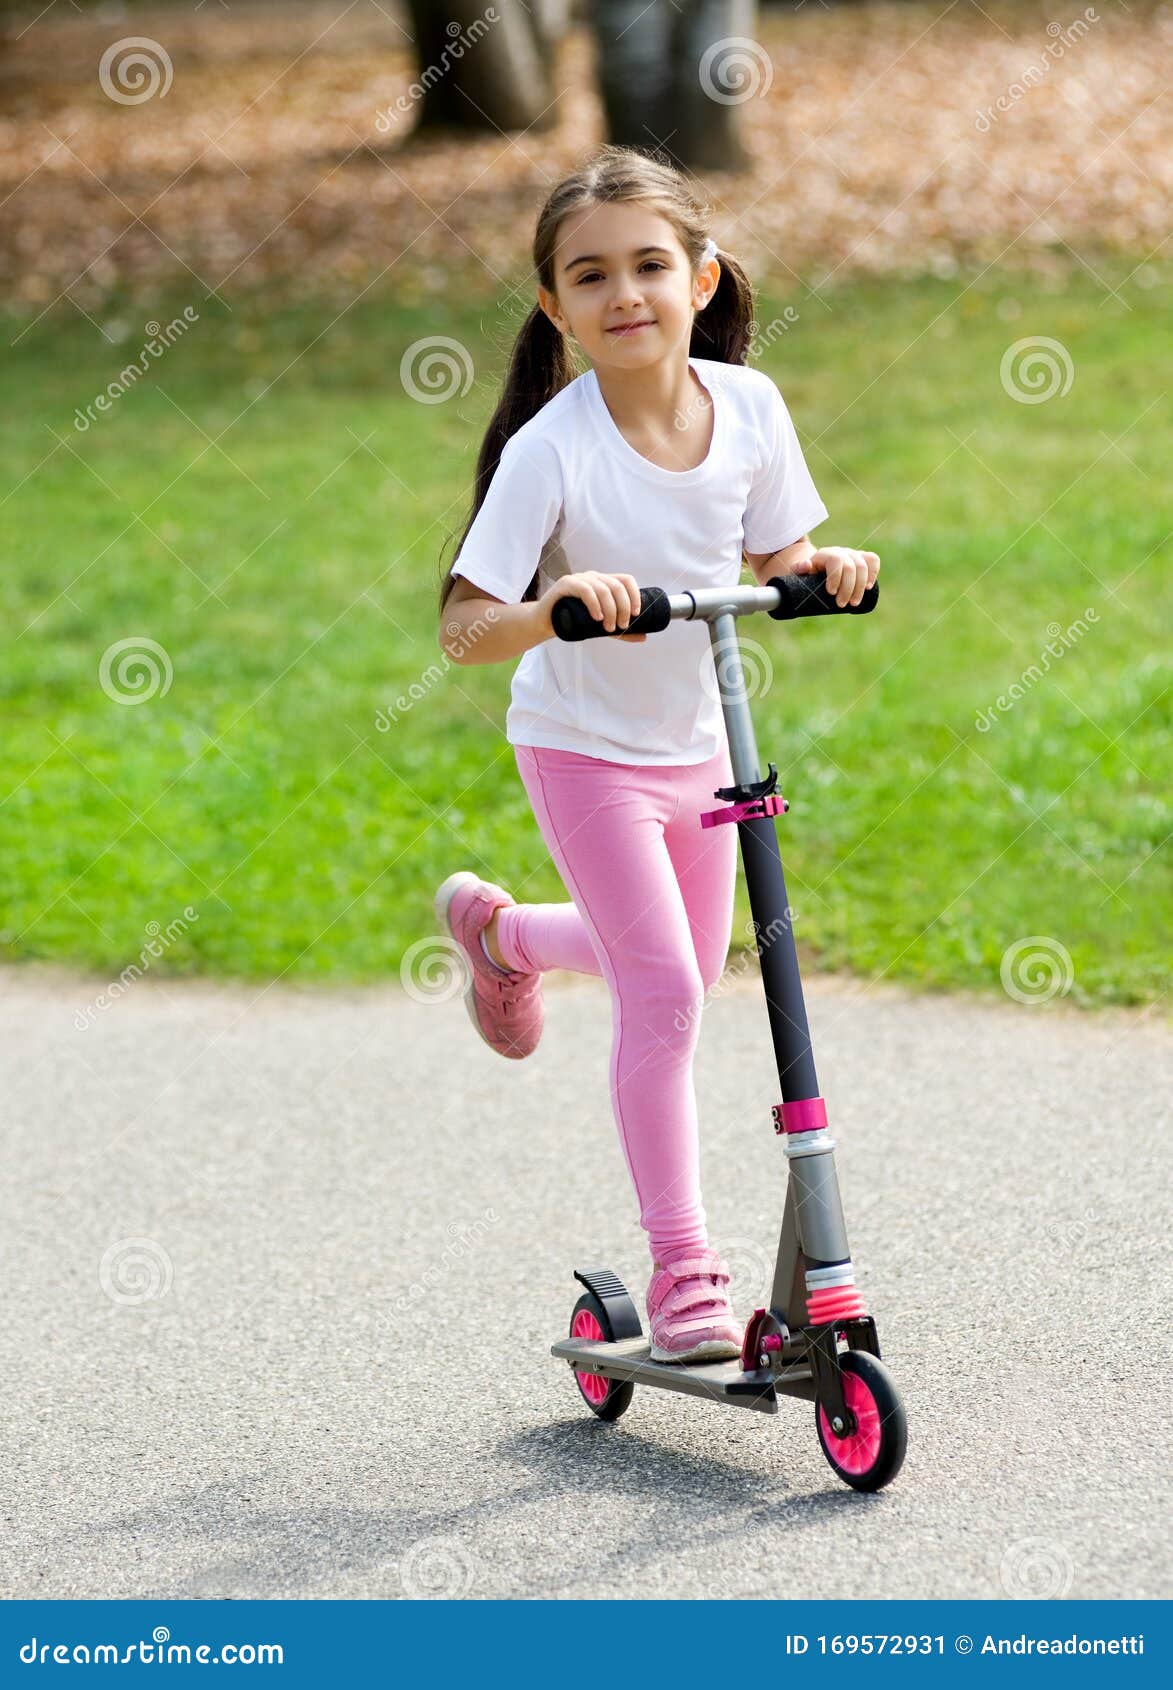 little girl on scooter